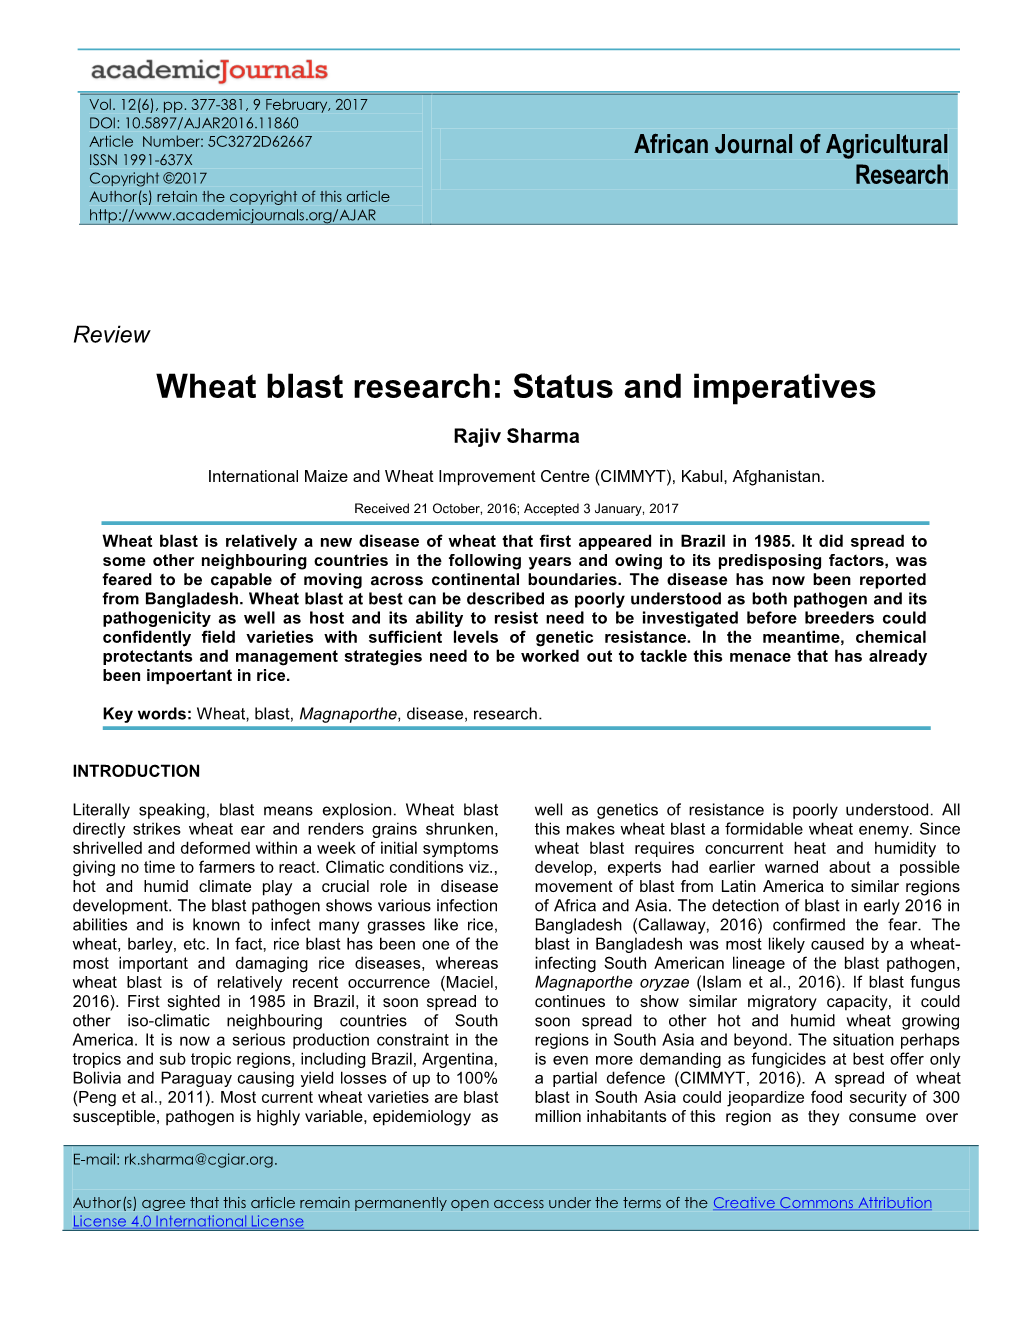 Wheat Blast Research: Status and Imperatives